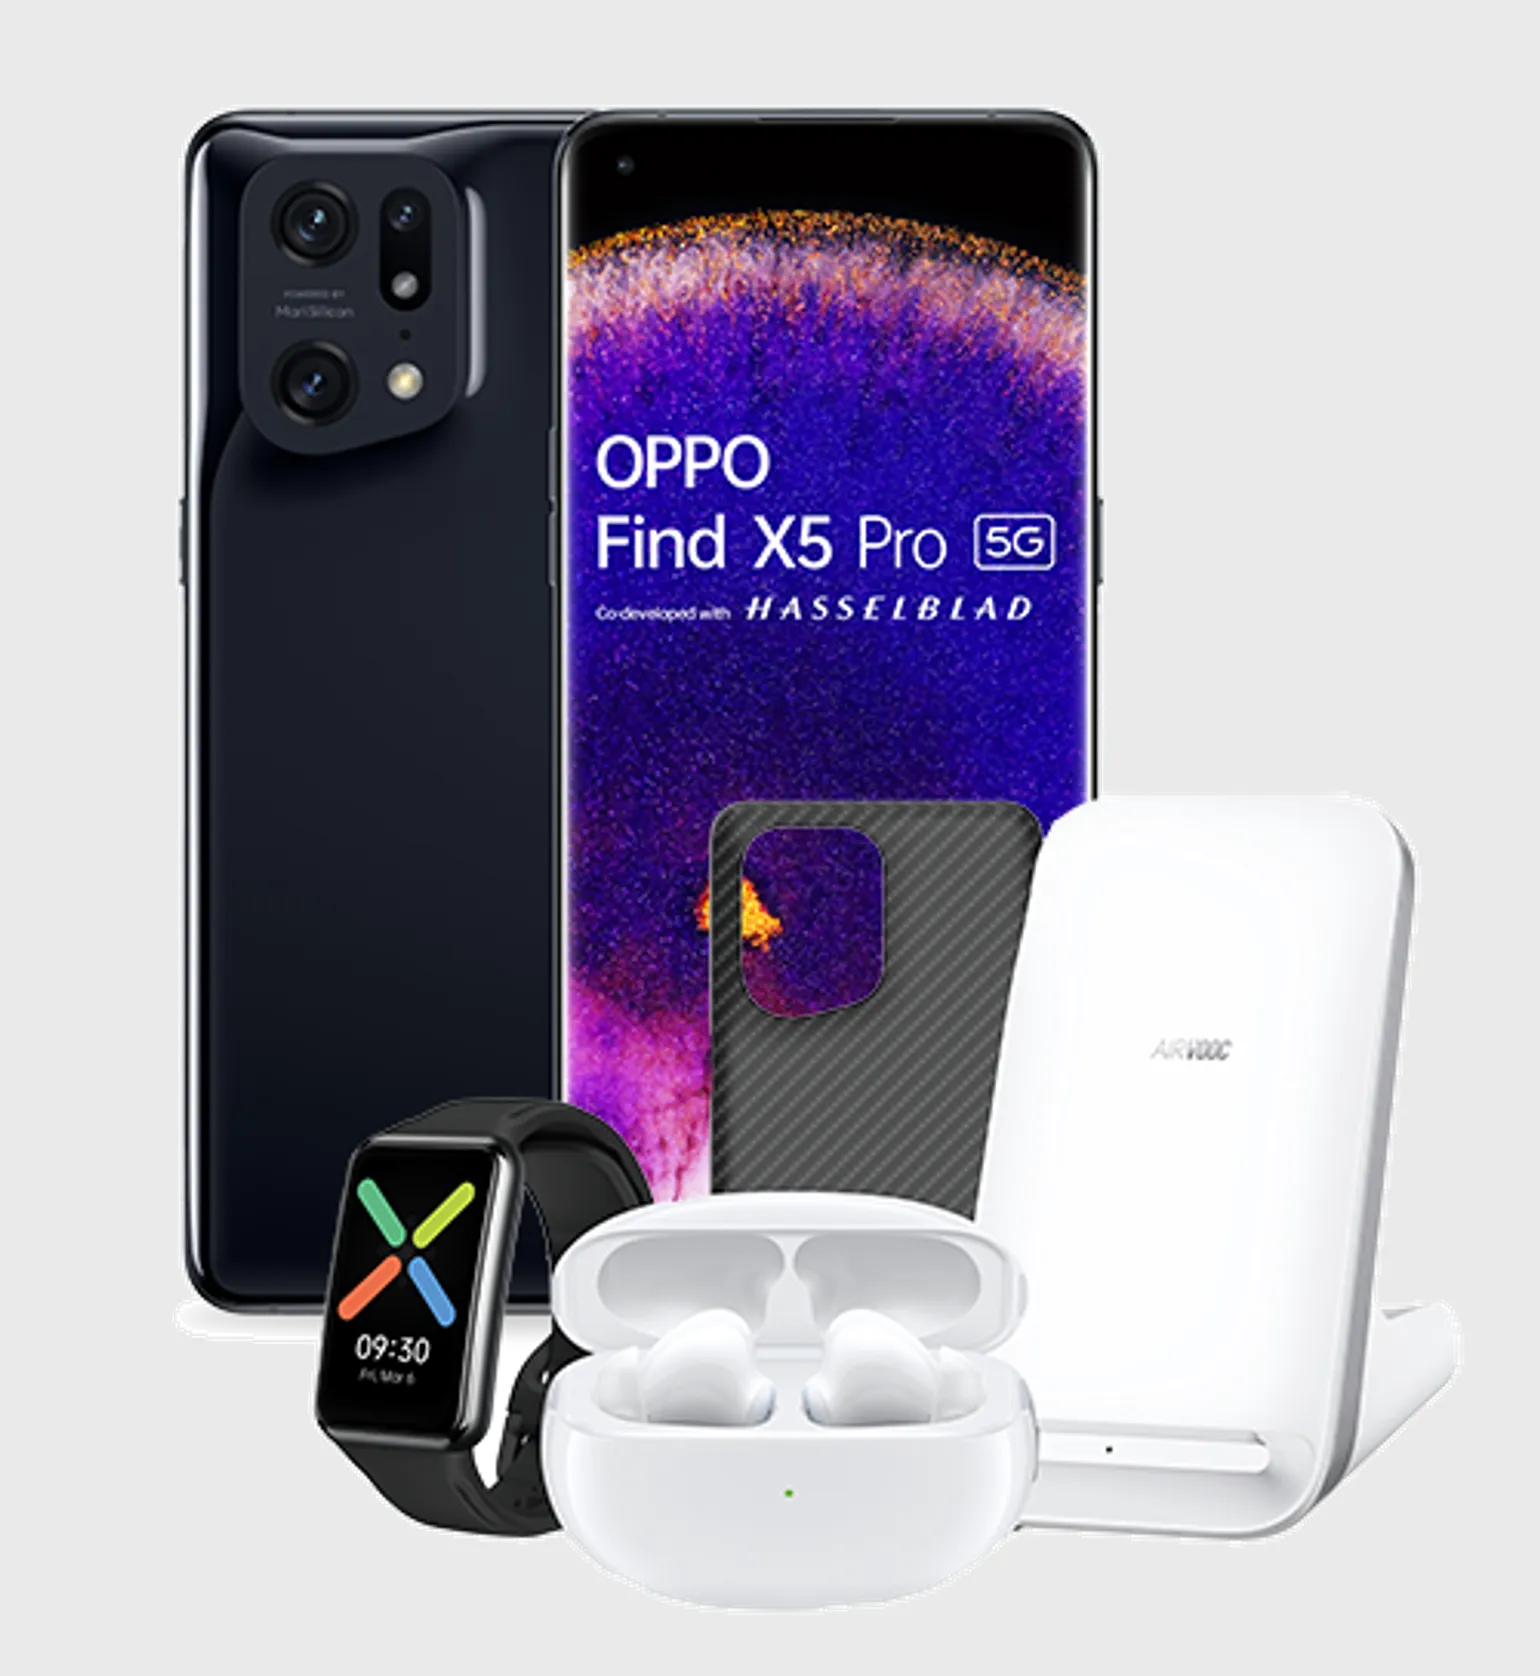 Pre-orders of the Oppo Find X5 and Find X5 Pro in the UK will include £373 worth of free gifts